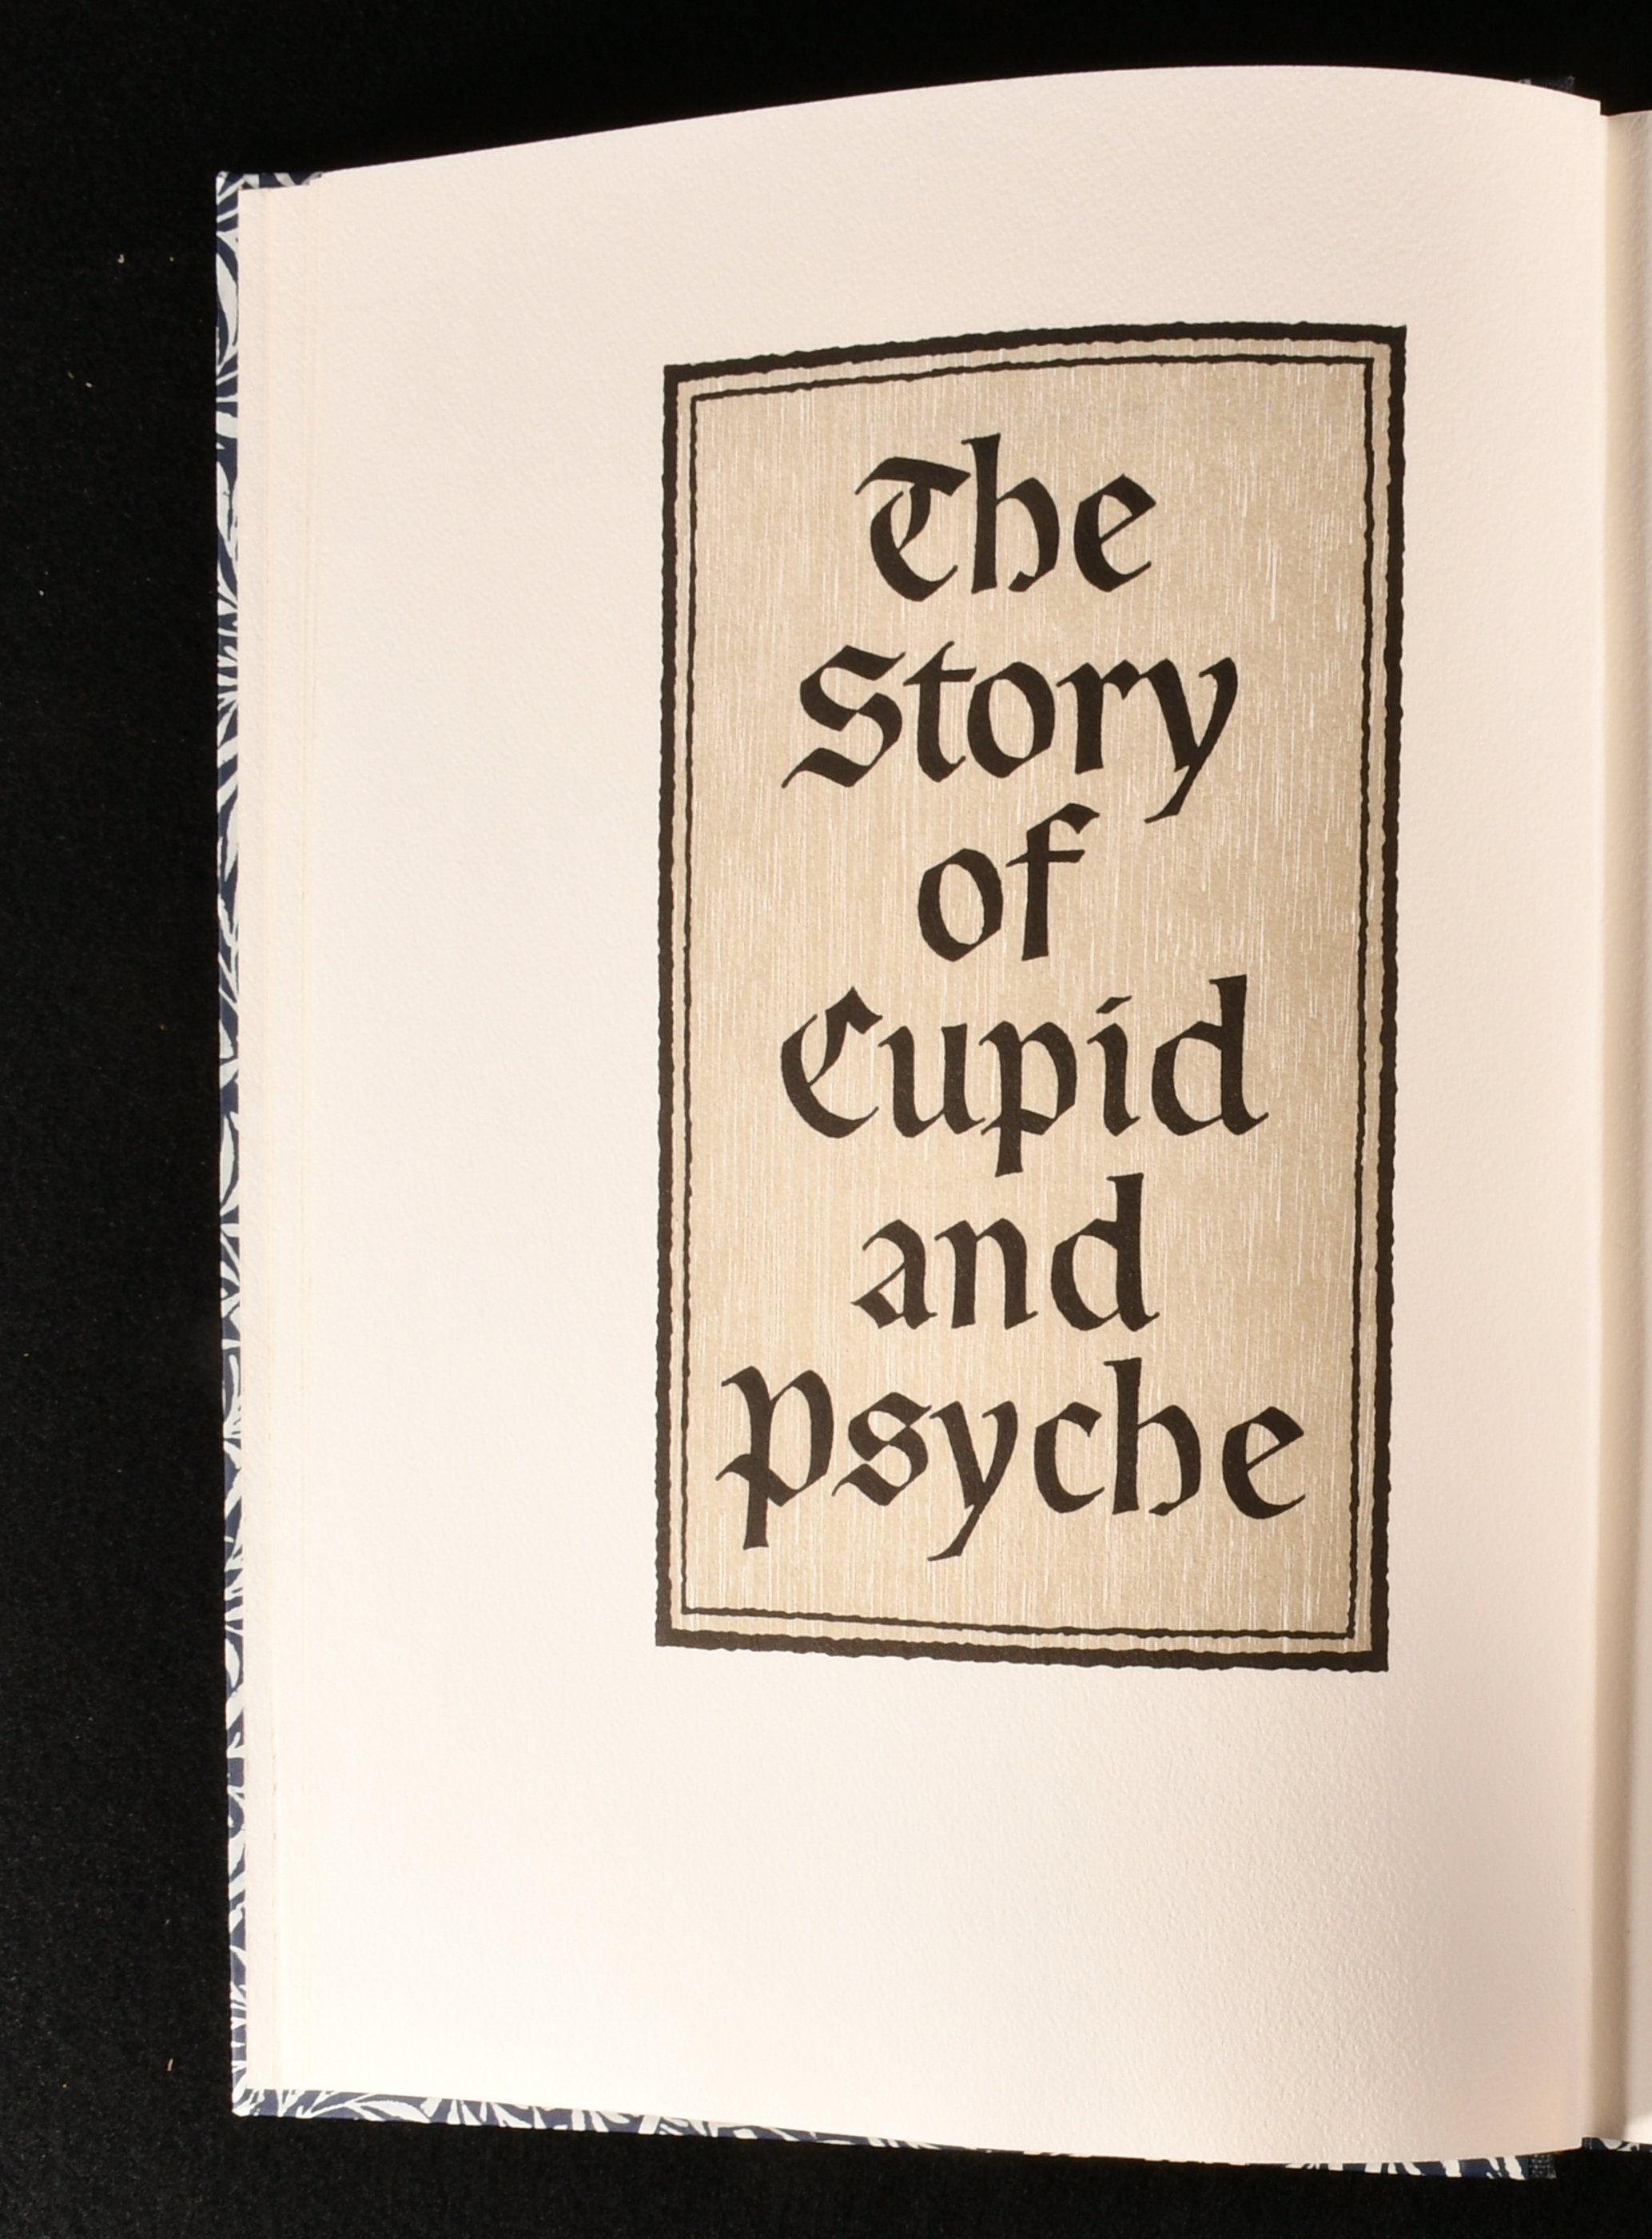 British 1974 The Story of Cupid and Psyche